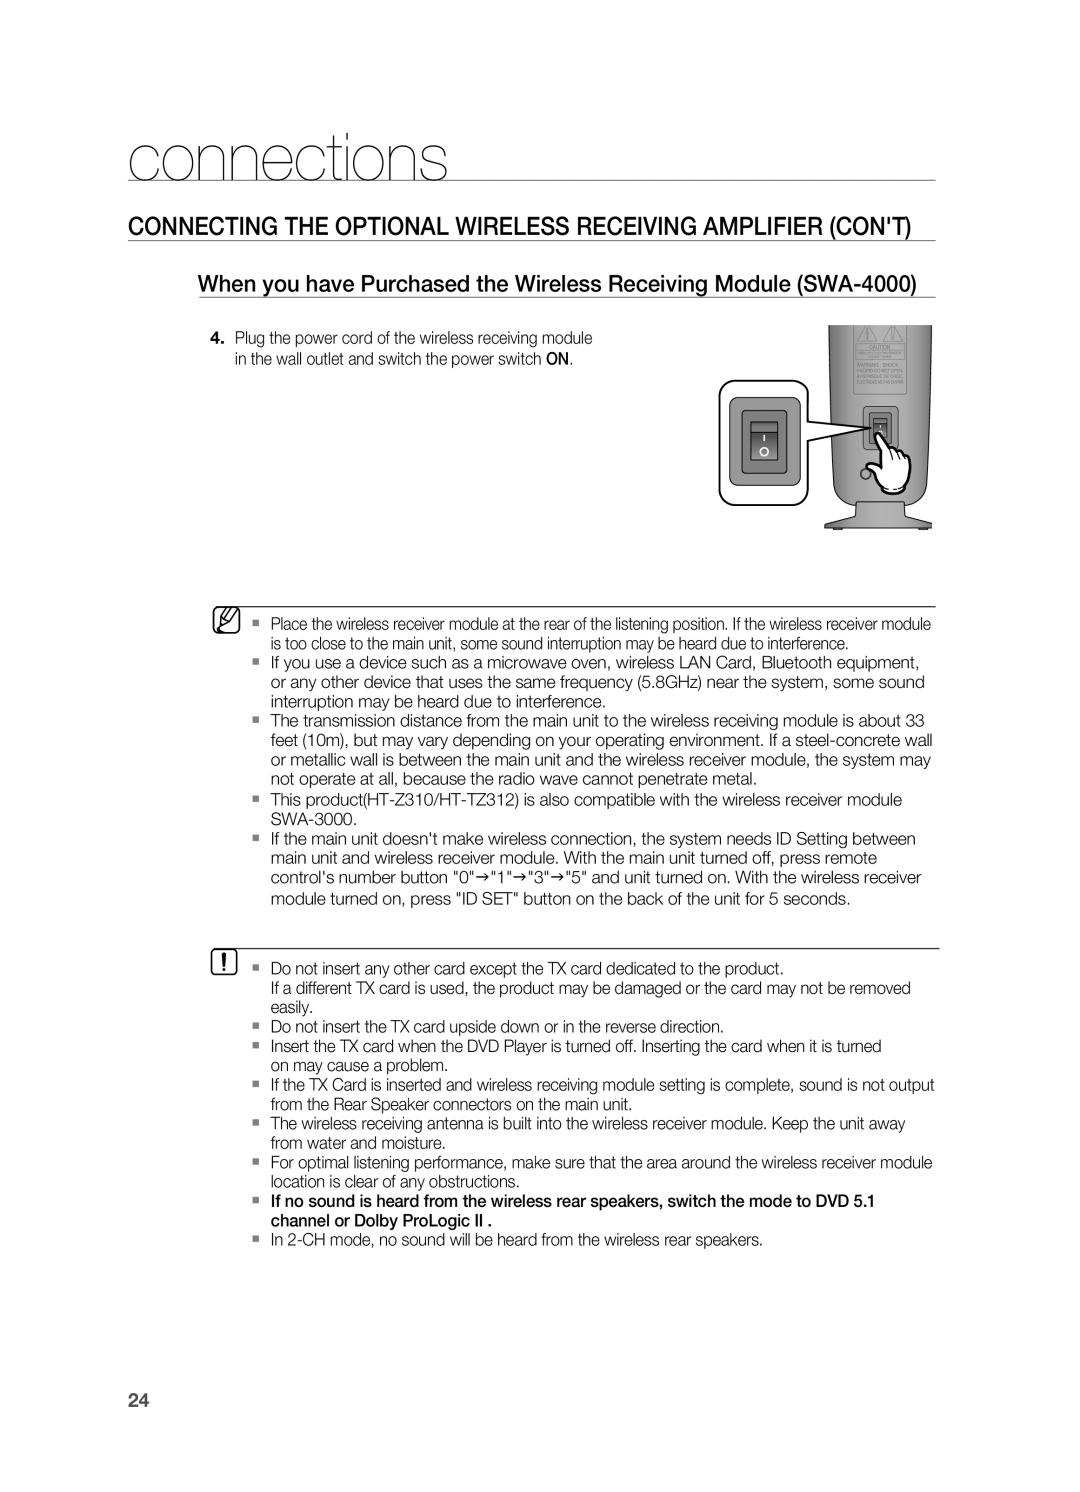 Samsung AH68-02055S manual Connecting the Optional Wireless Receiving Amplifier cont, connections 